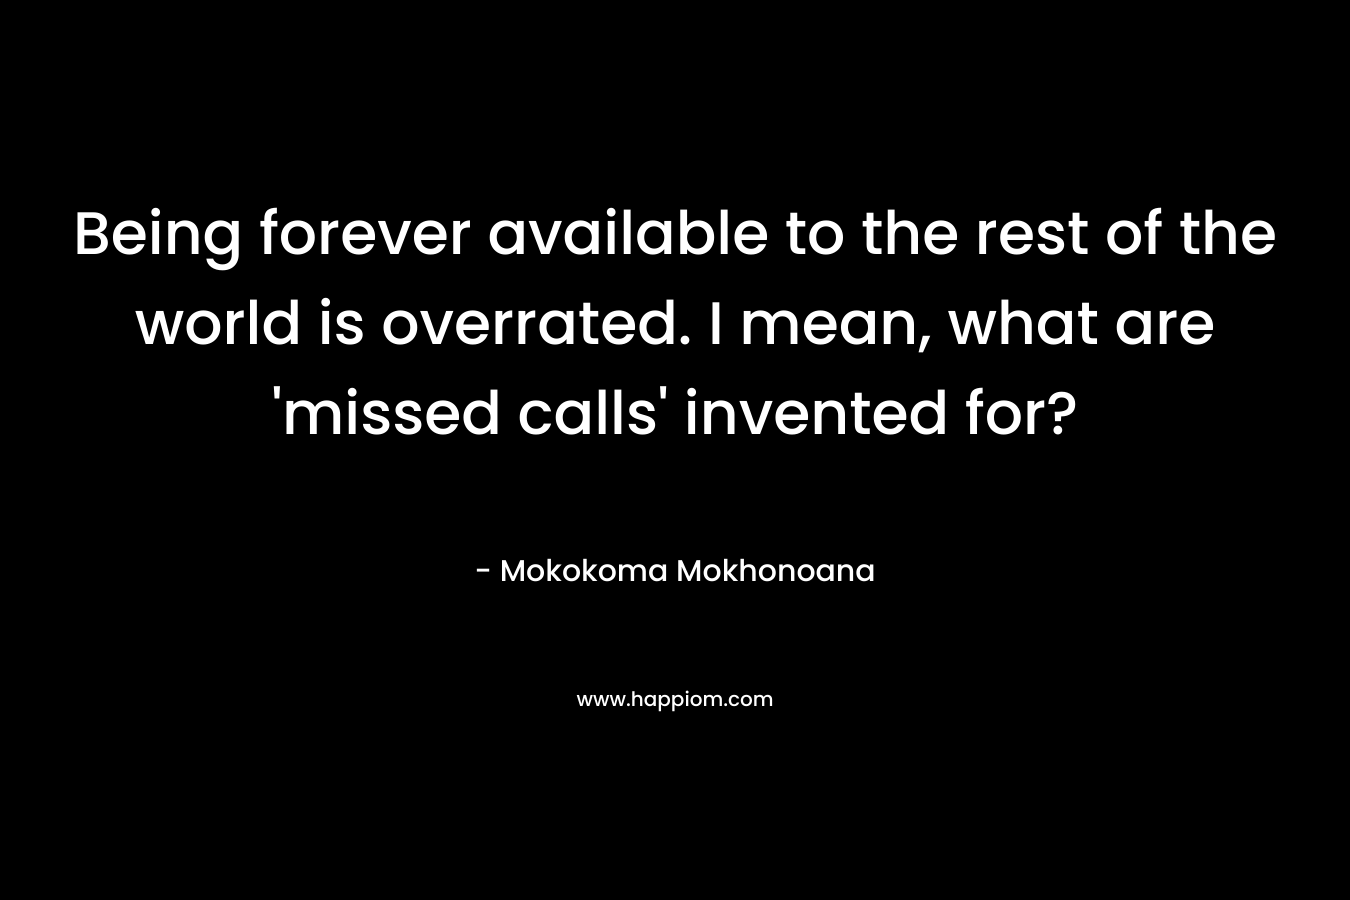 Being forever available to the rest of the world is overrated. I mean, what are 'missed calls' invented for?